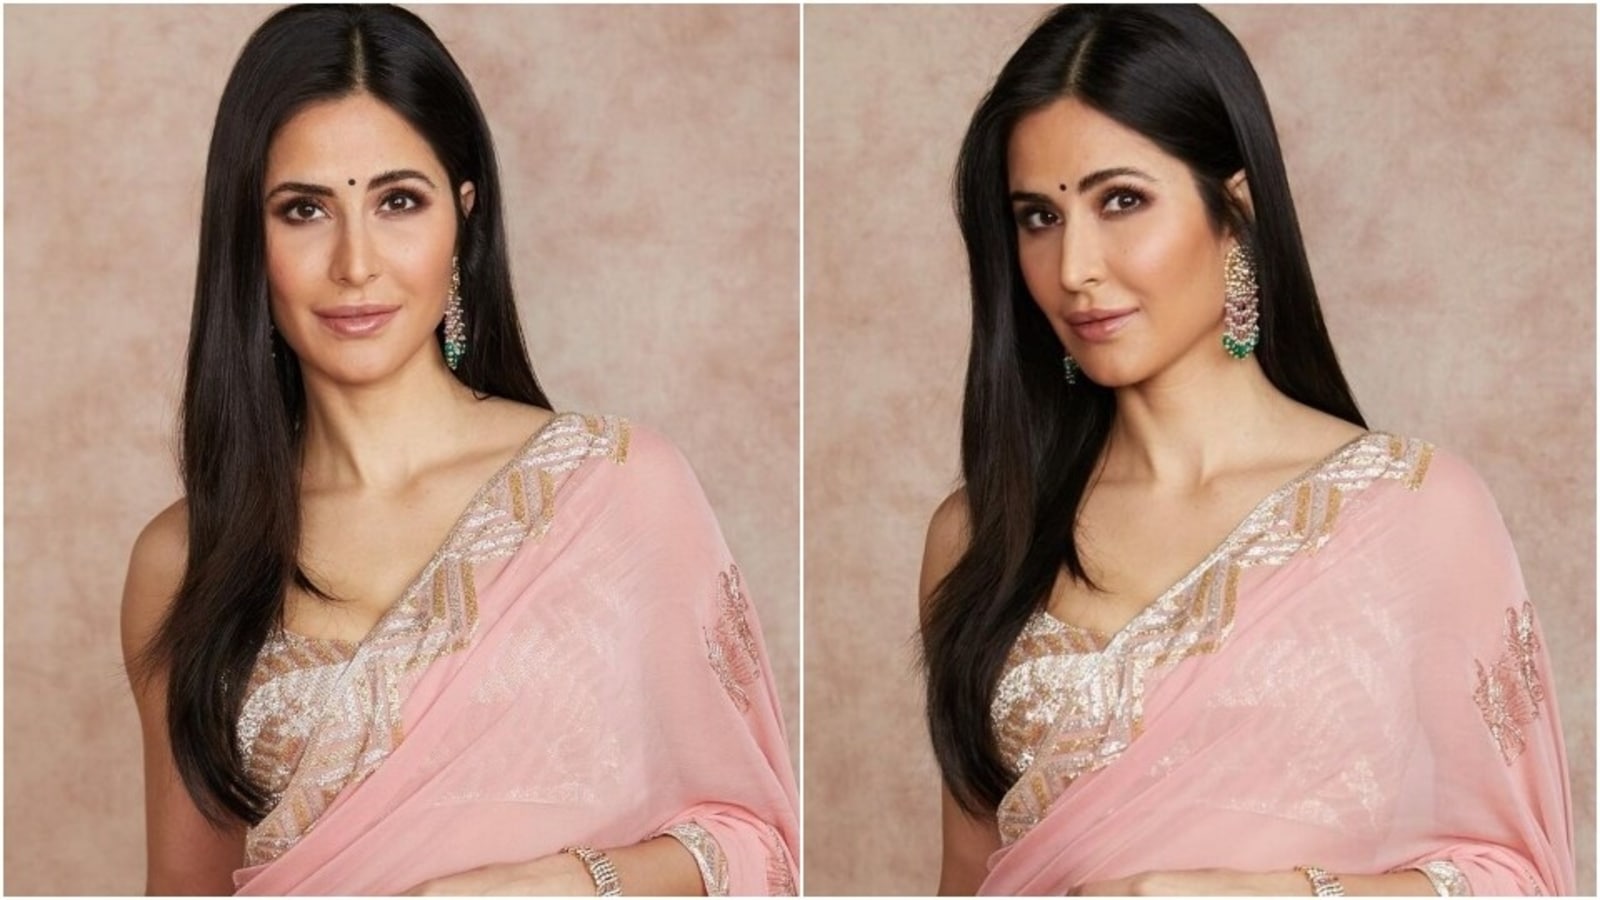 Katrina Kaif Blush Pink Saree Is The Quintessential Festive Look Fan Calls Her Queen Of Million